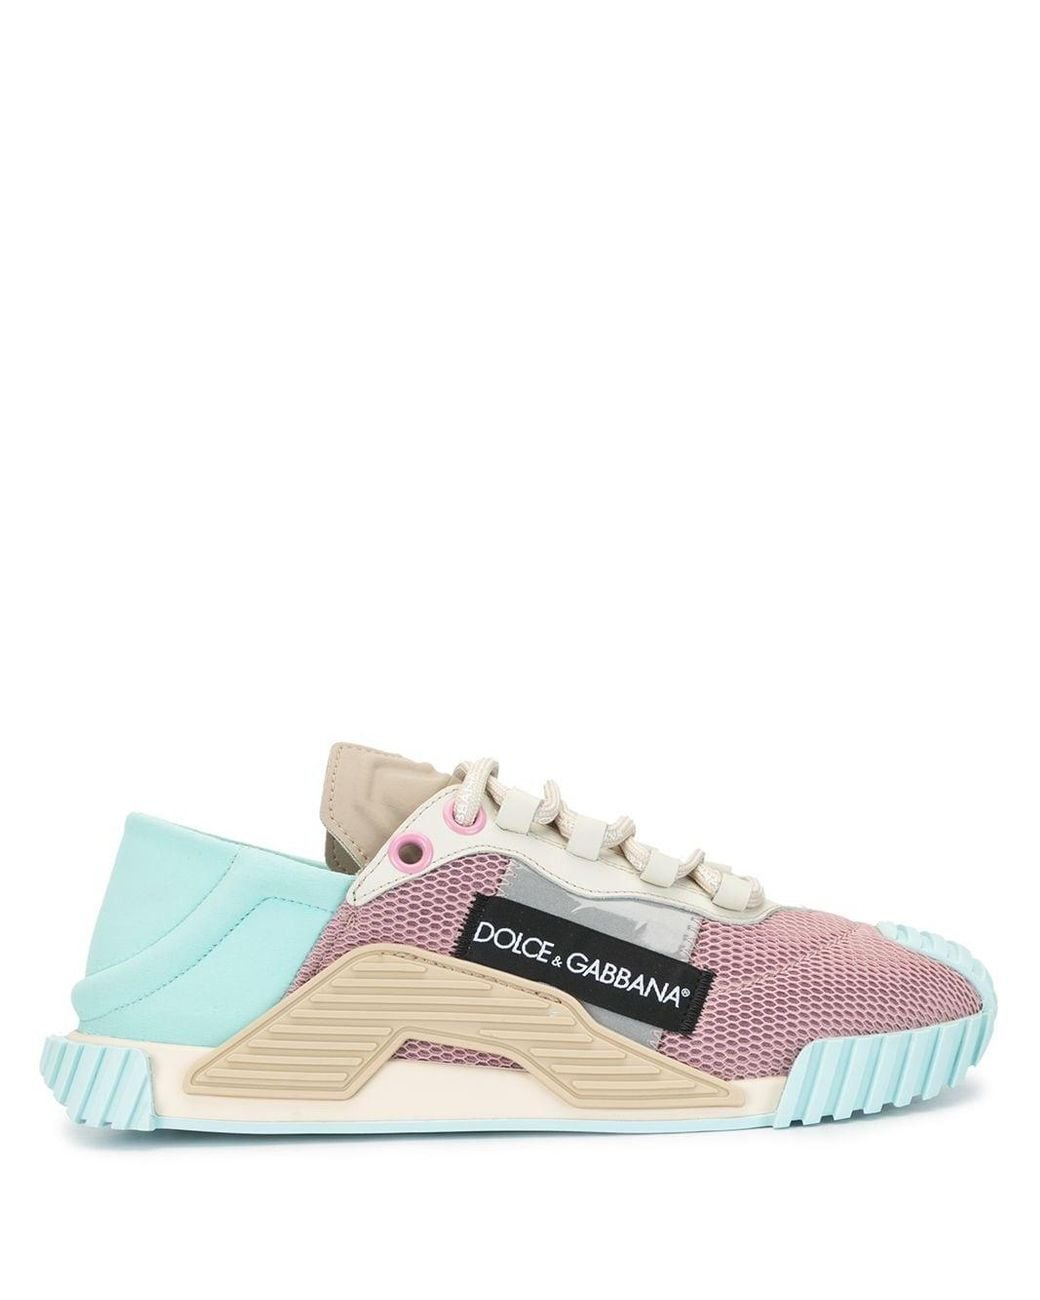 Dolce & Gabbana Ns1 Low-top Sneakers in Pink | Lyst